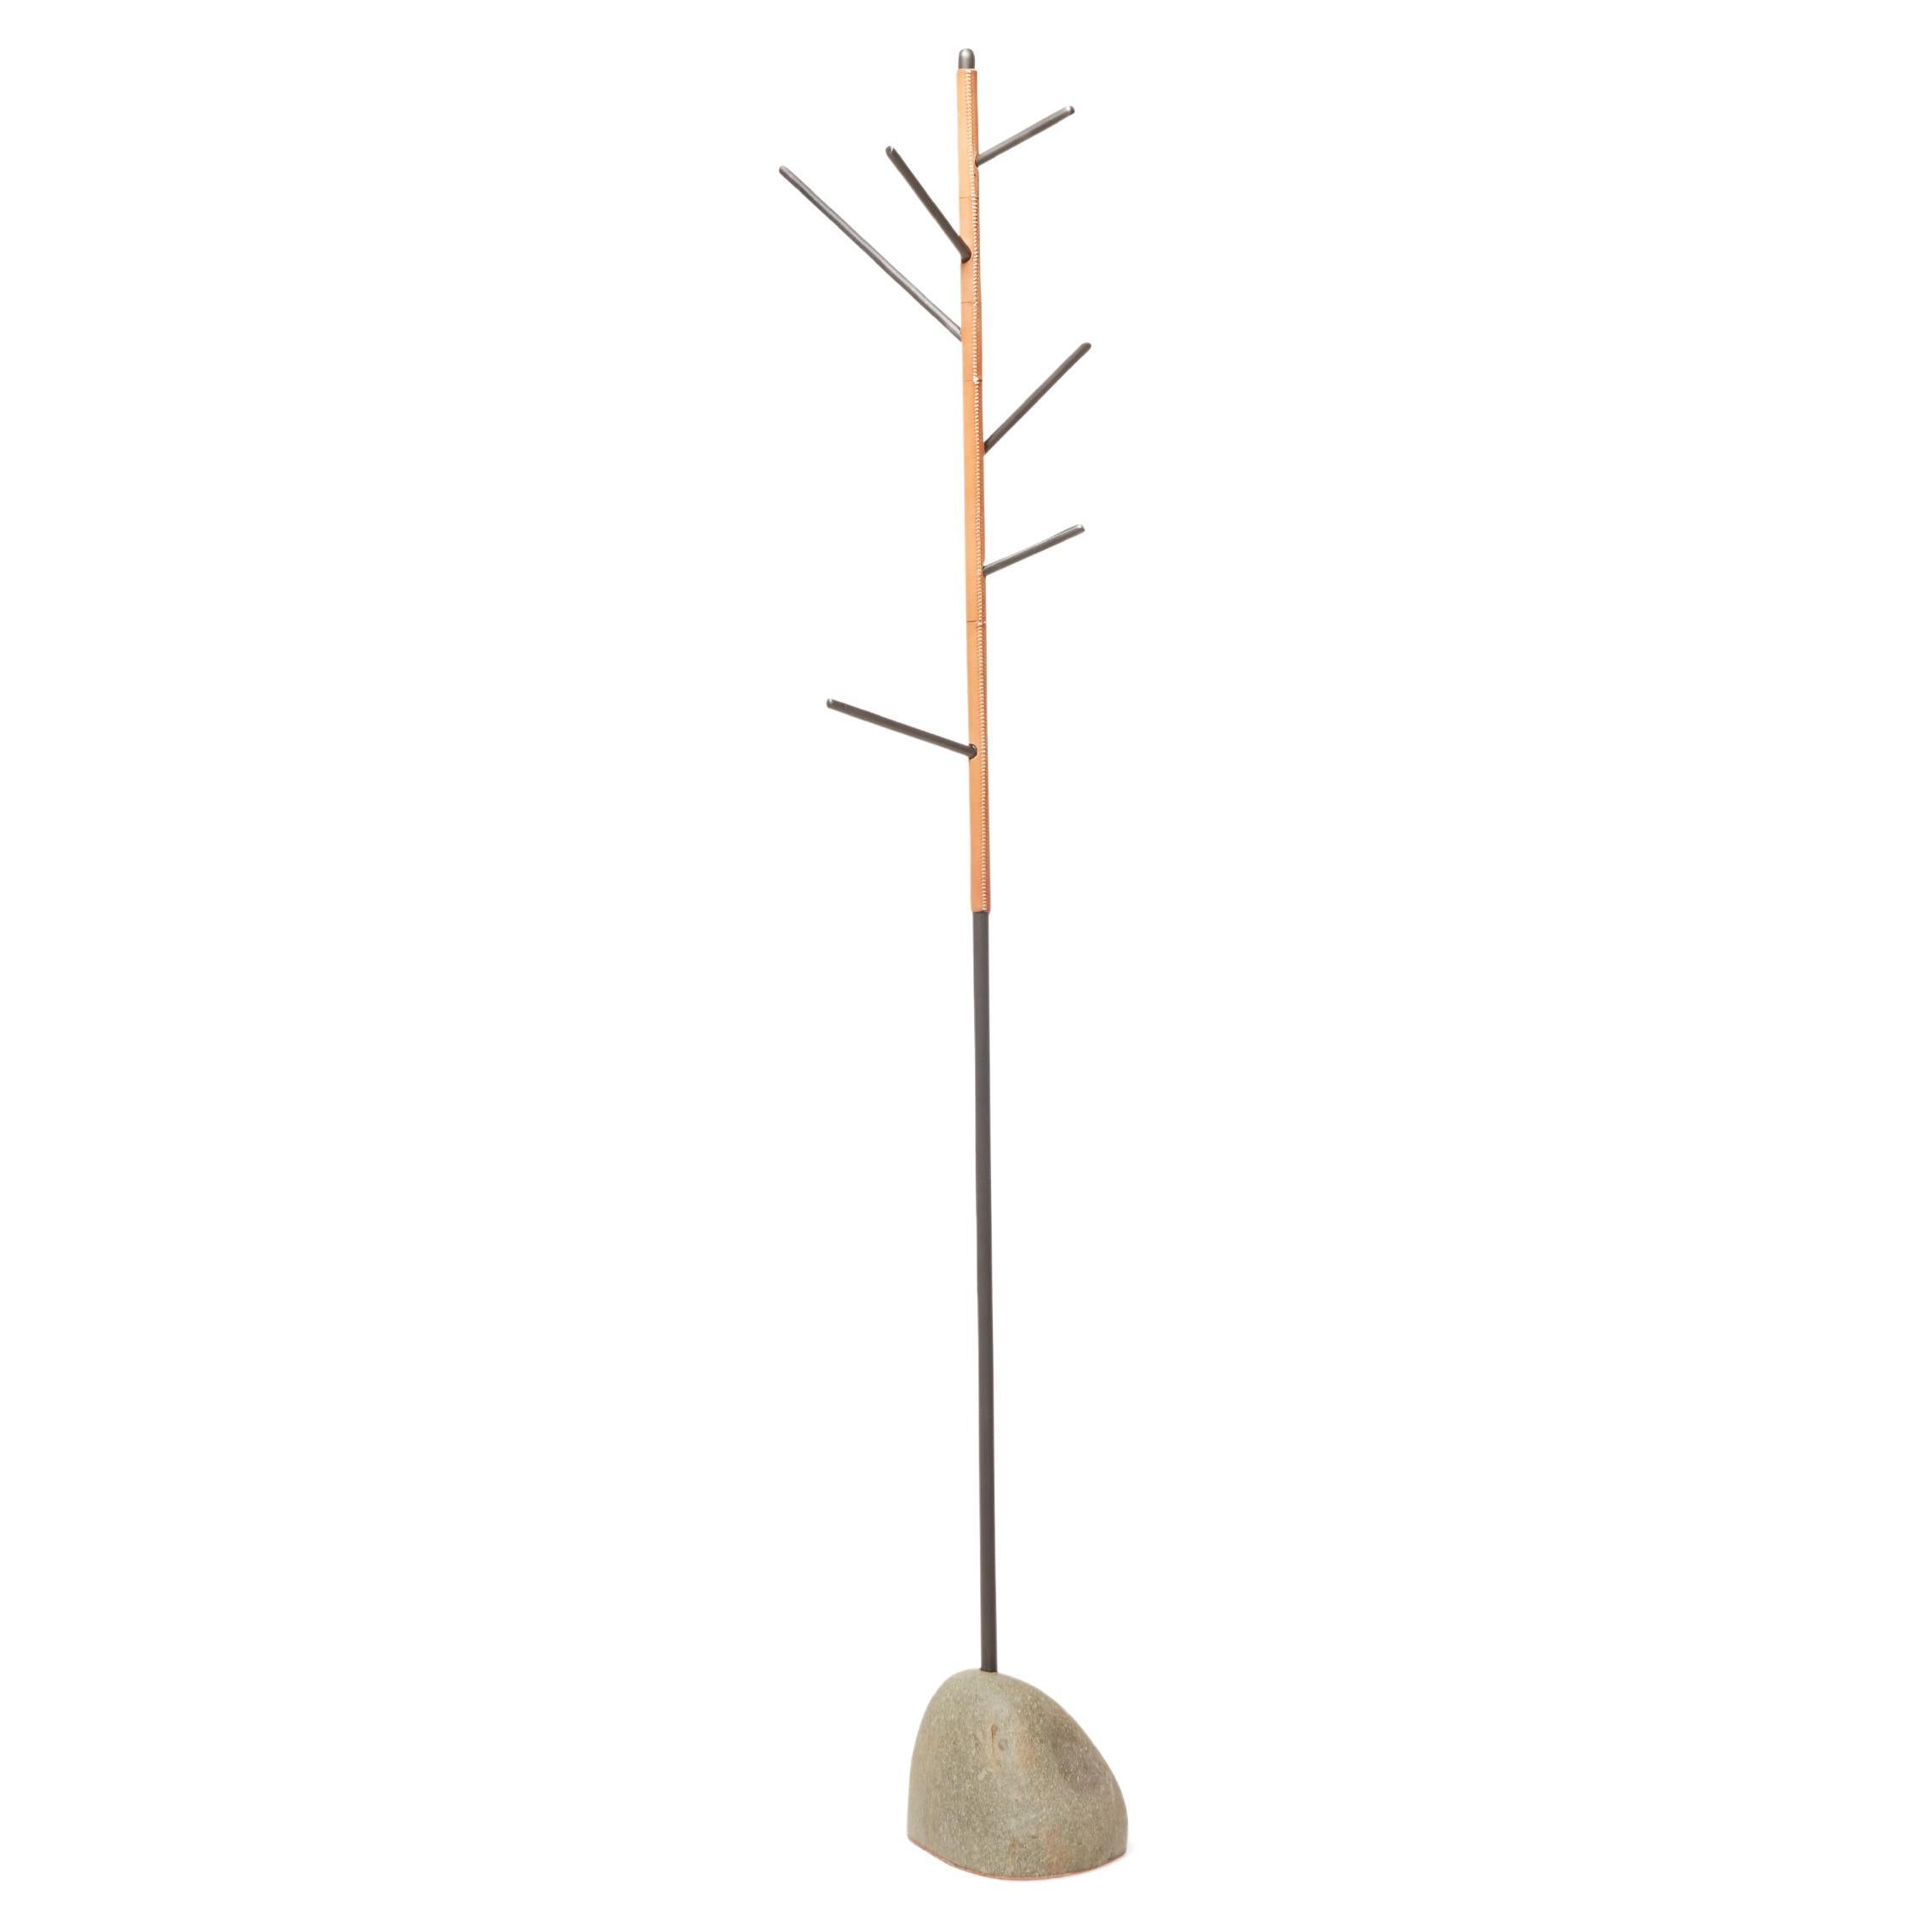 Grounded Collection Leather-Wrapped Coatrack For Sale